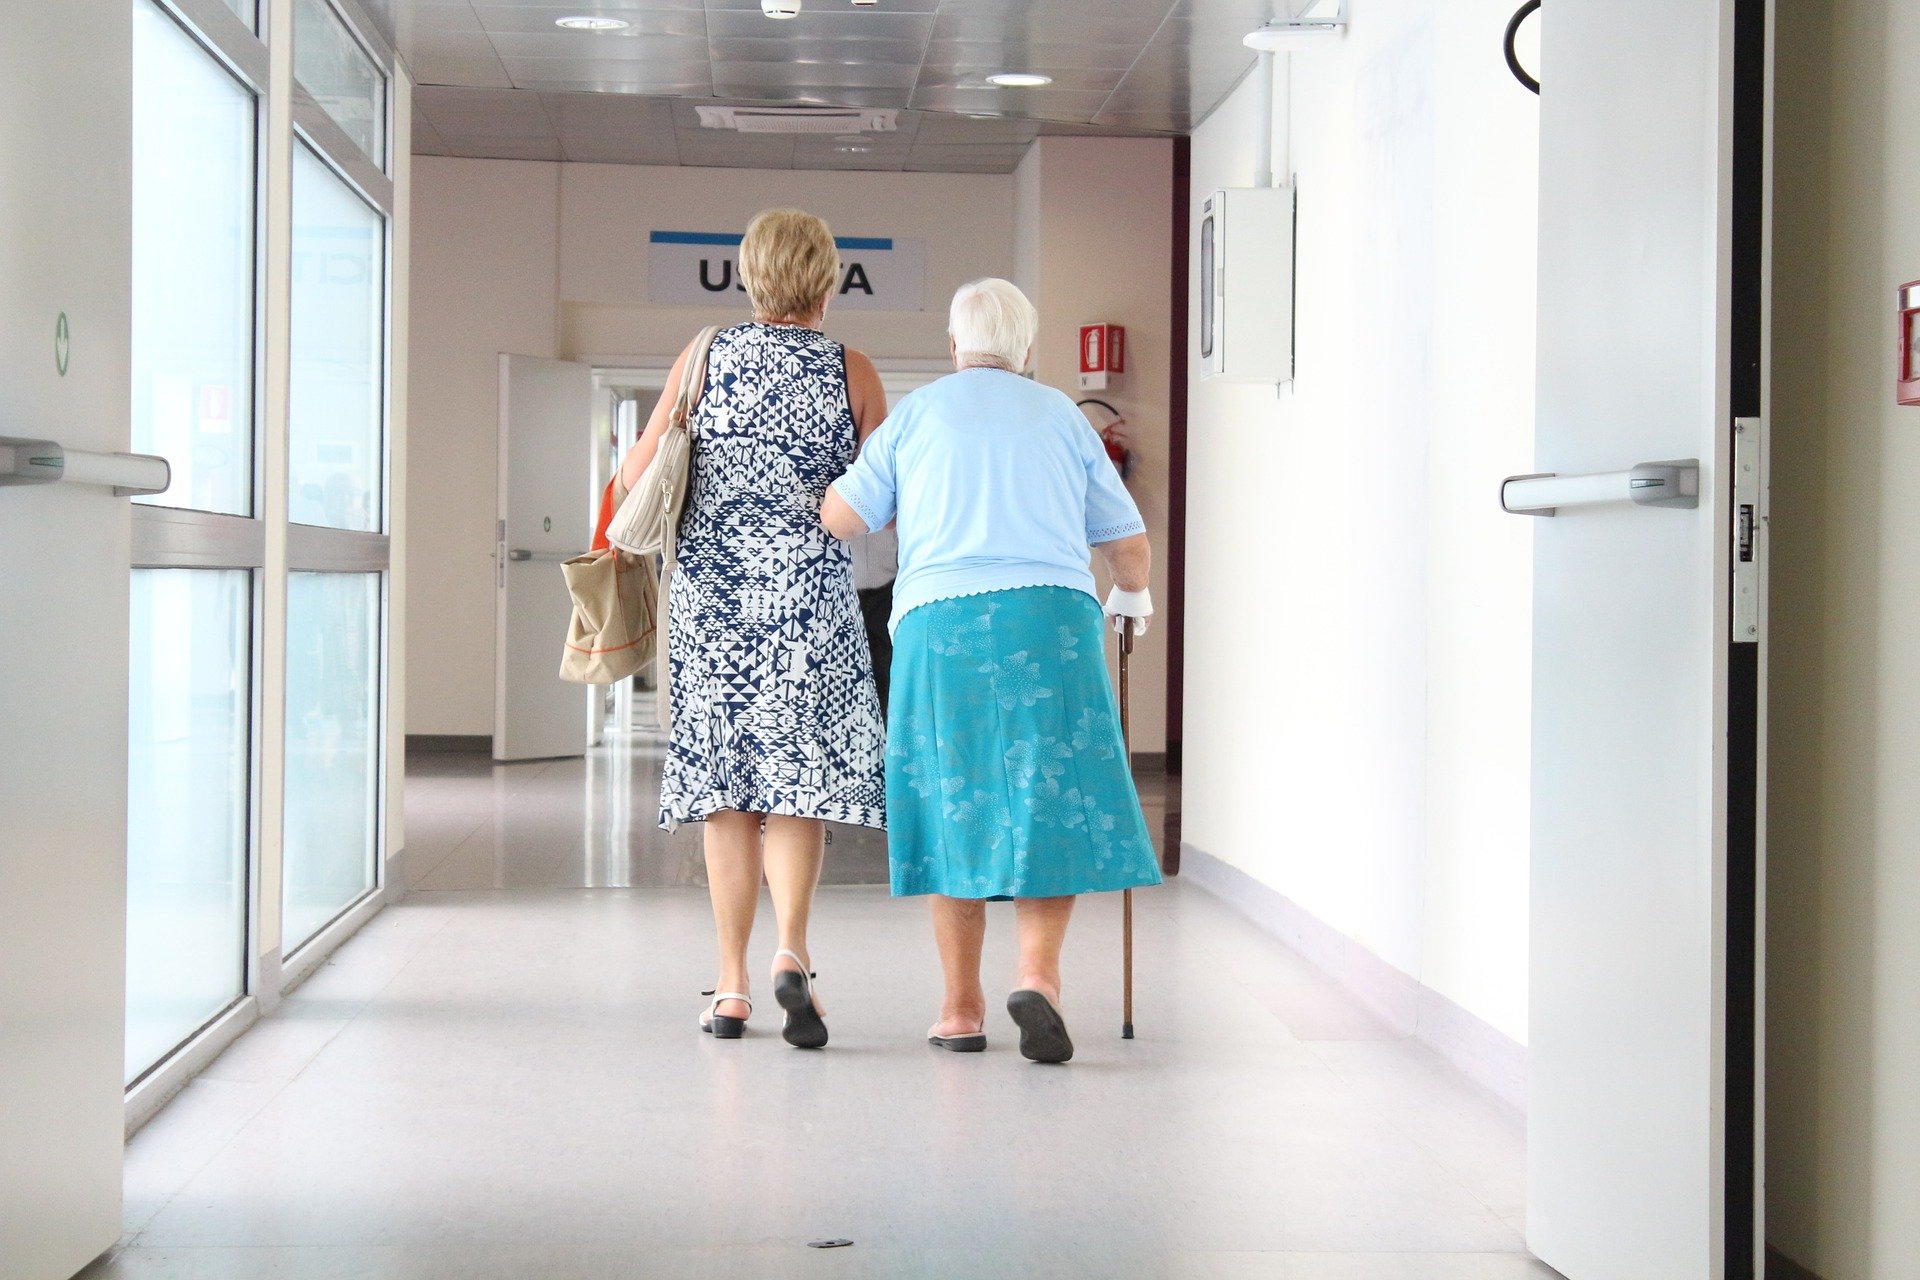 Middle aged woman aiding her elderly mother down hospital corridor